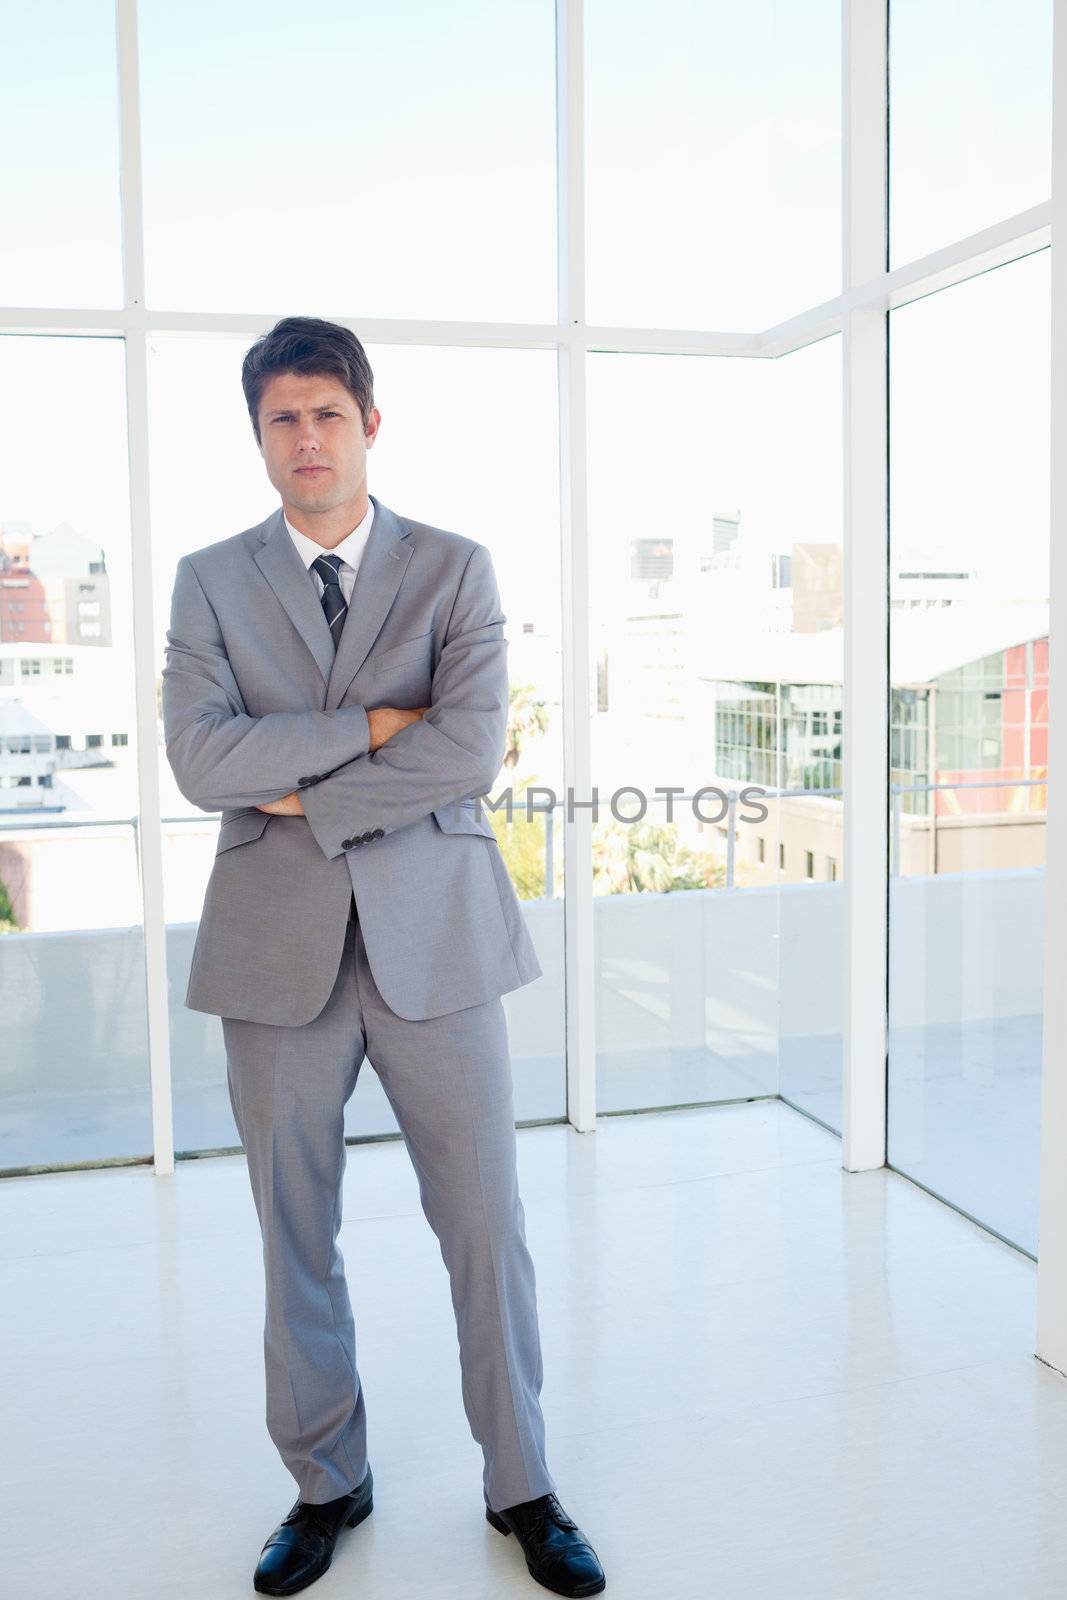 Serious businessman standing in a bright space